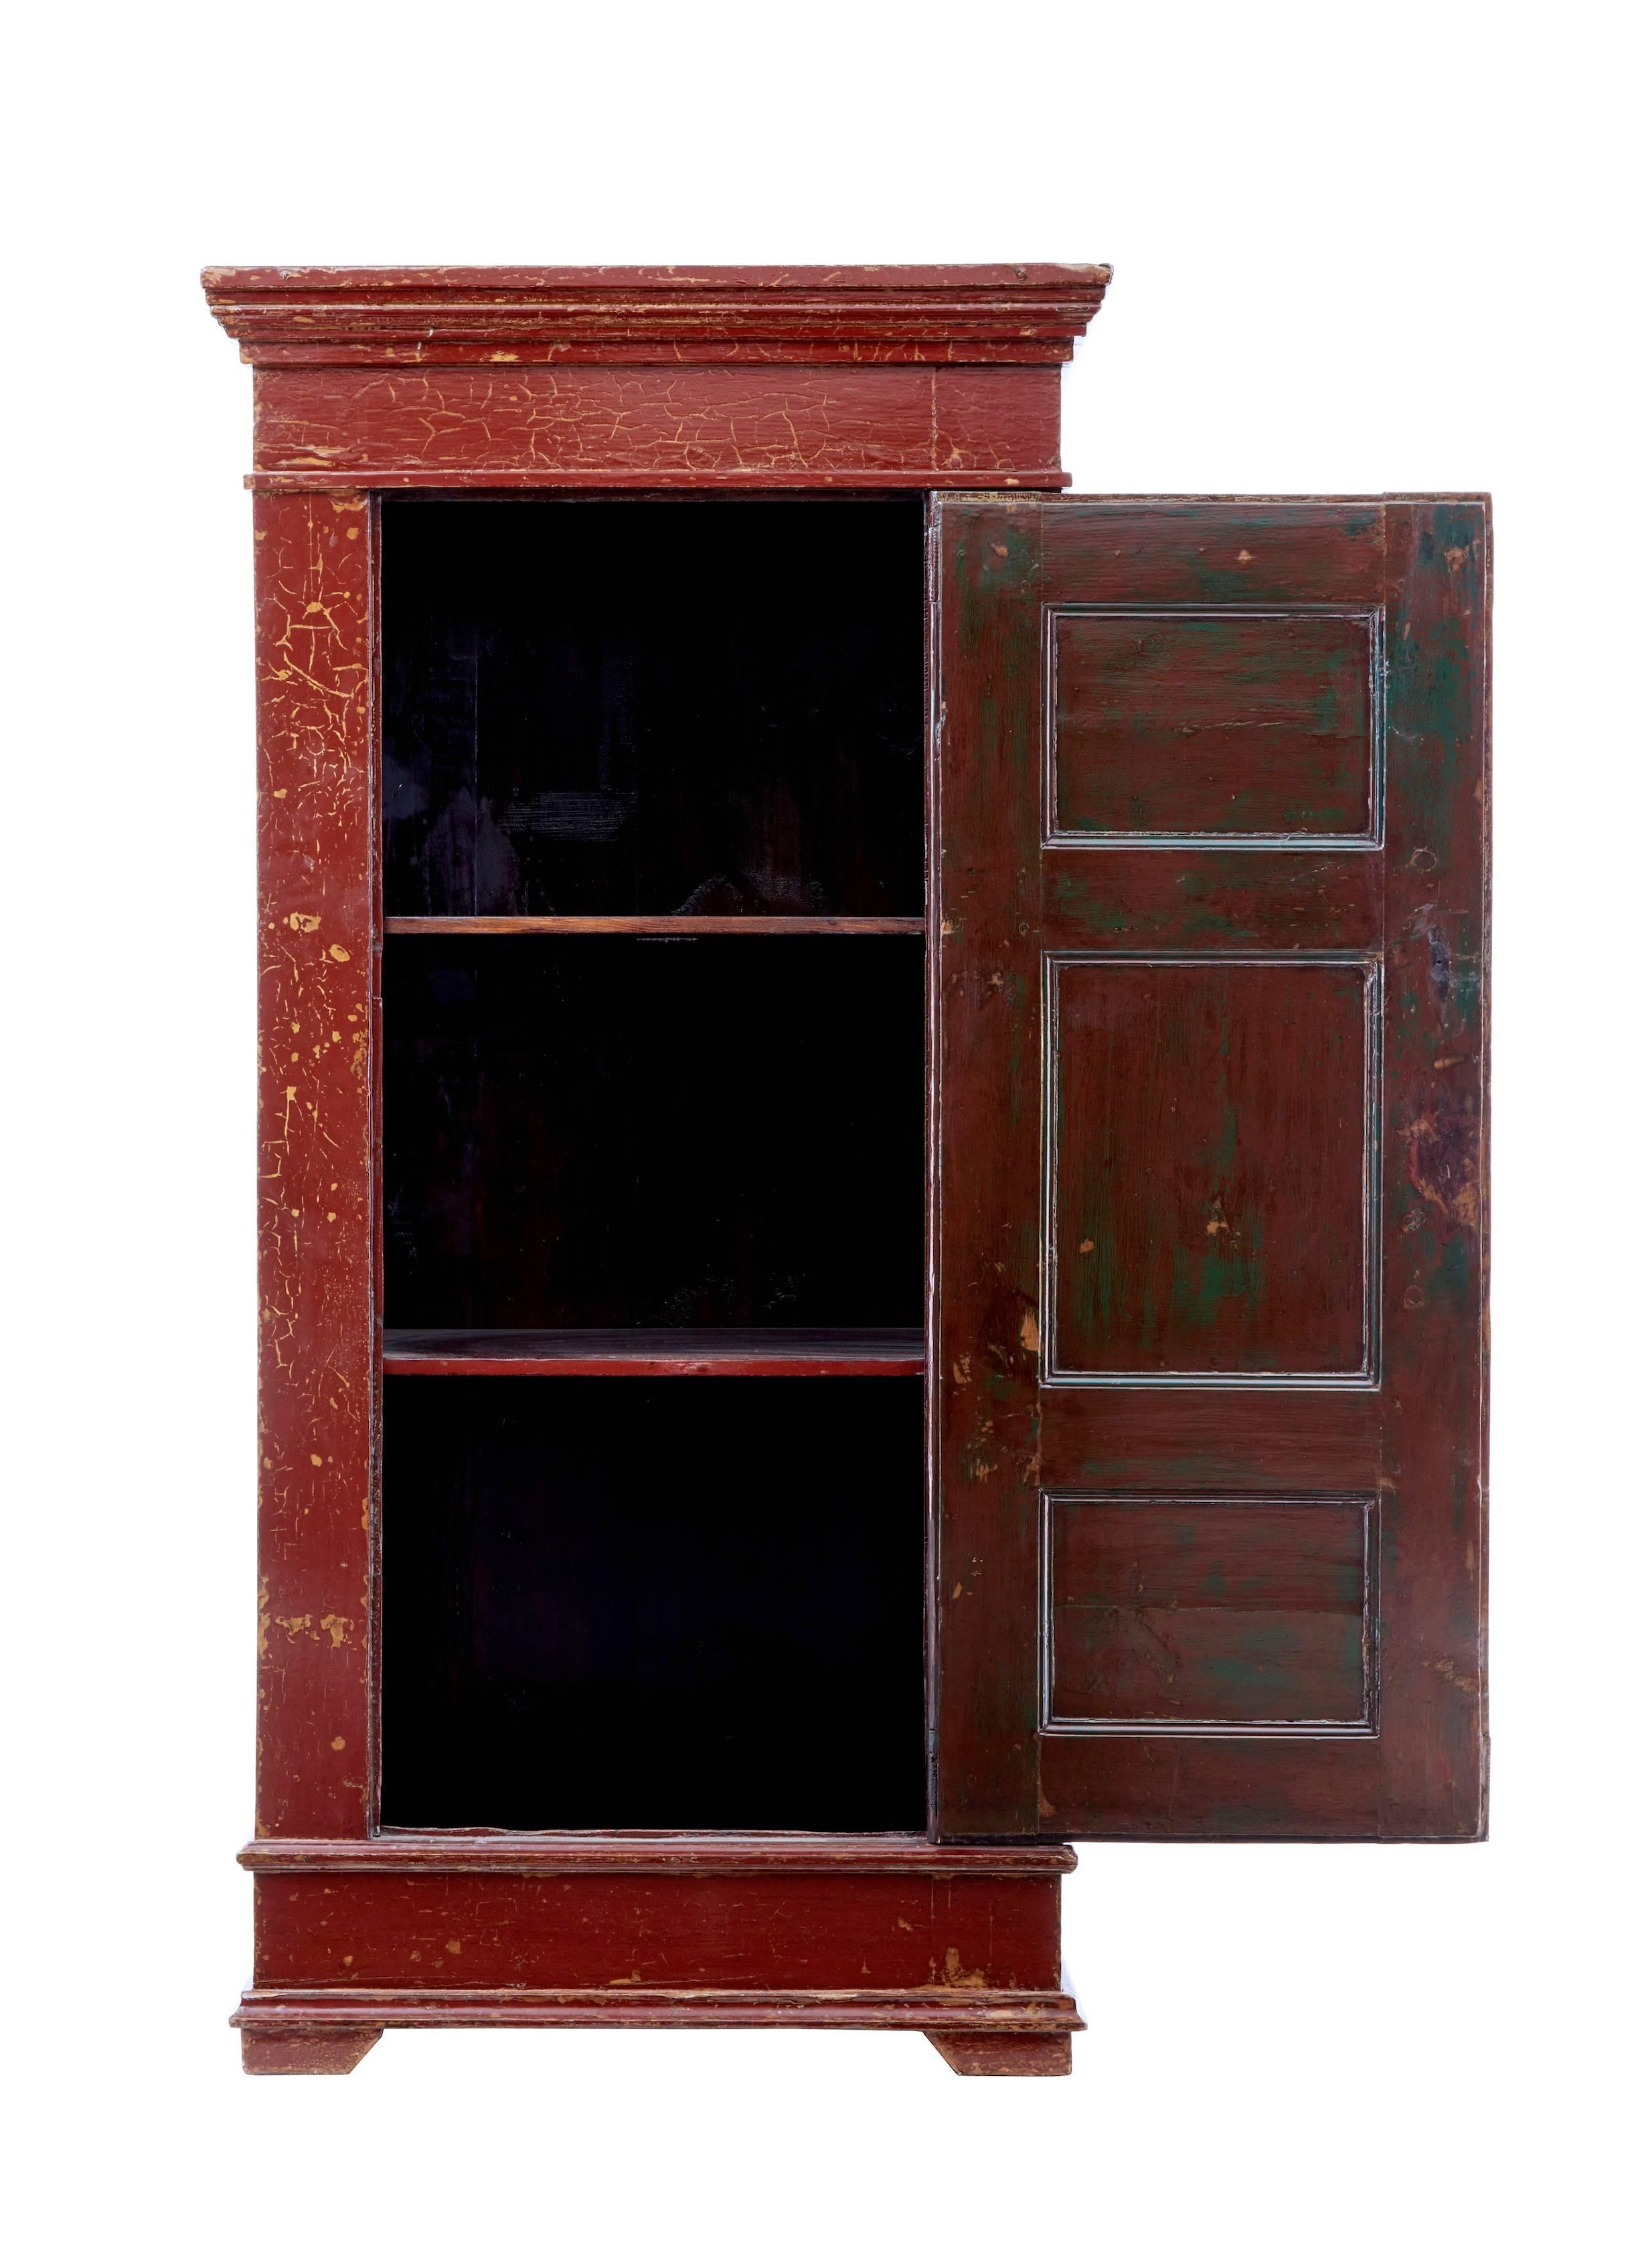 Large Chinese single door cupboard, circa 1890.
Lacquer finished with a superb craquelure.
Single door with panels opens to reveal two shelves inside. Ideal for a linen cupboard.
Minor losses and age splits.


Measures: Height: 72 1/4